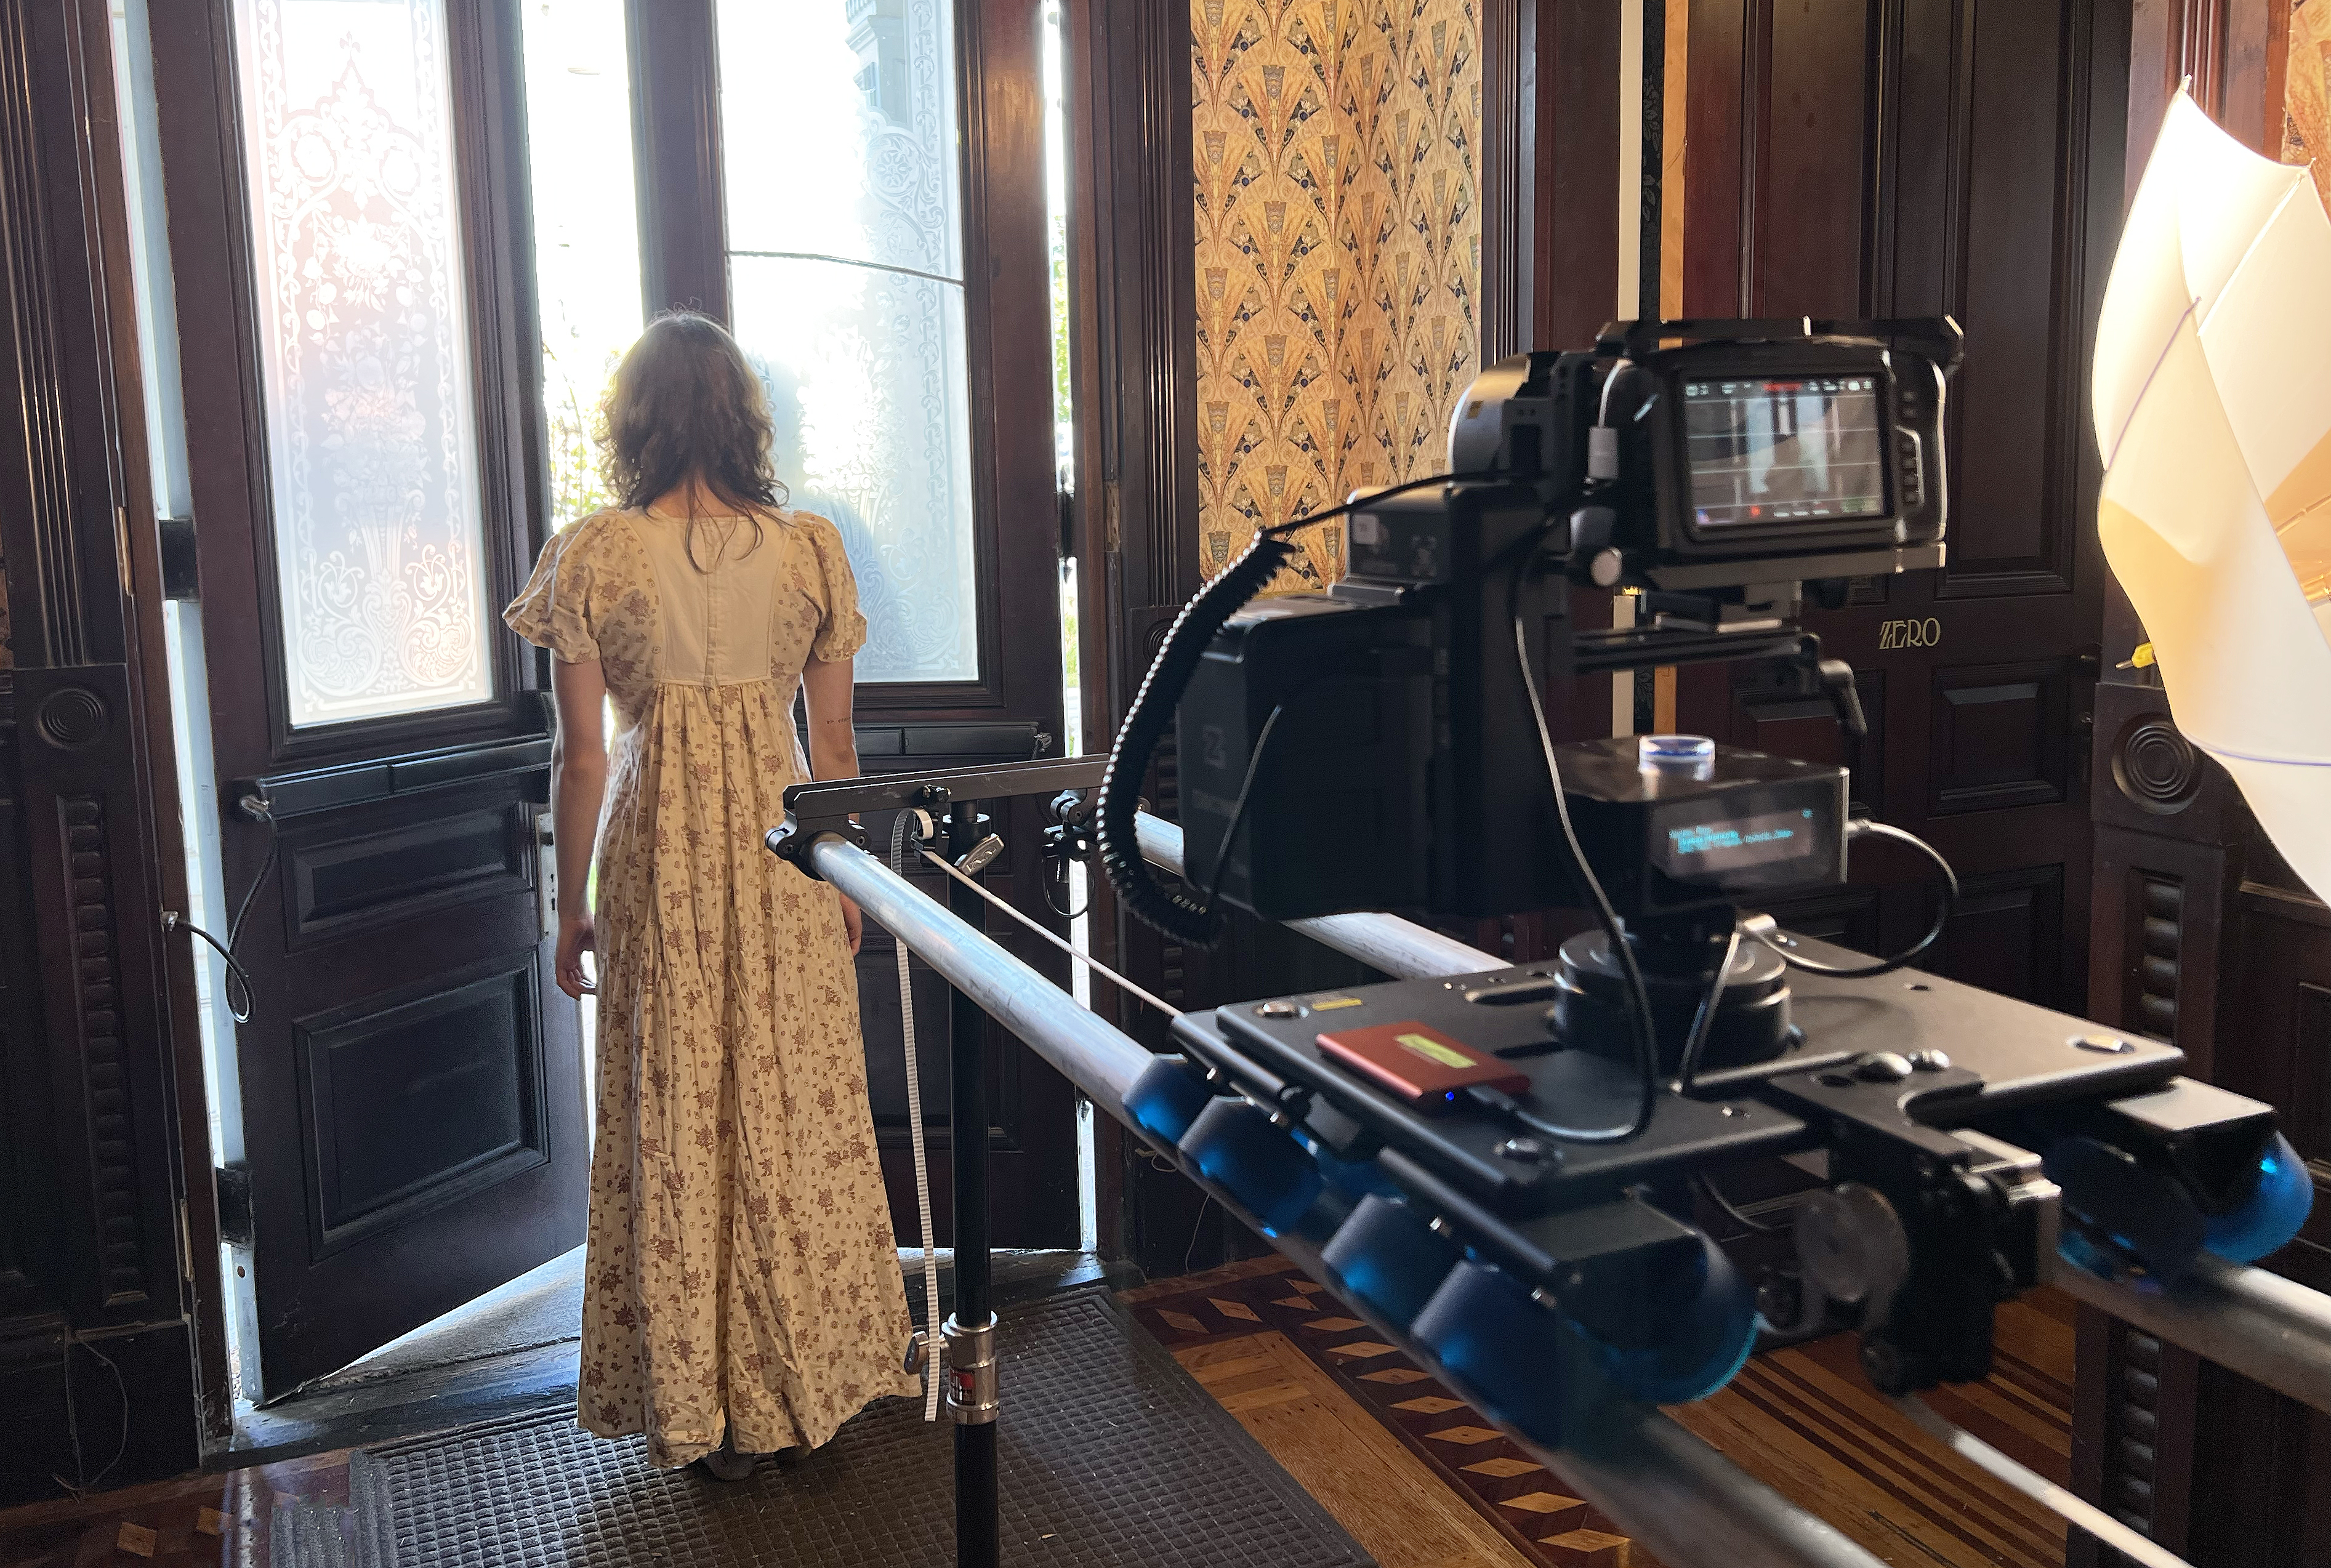 a student in an old-fashioned dress is filmed using an eMotimo setup